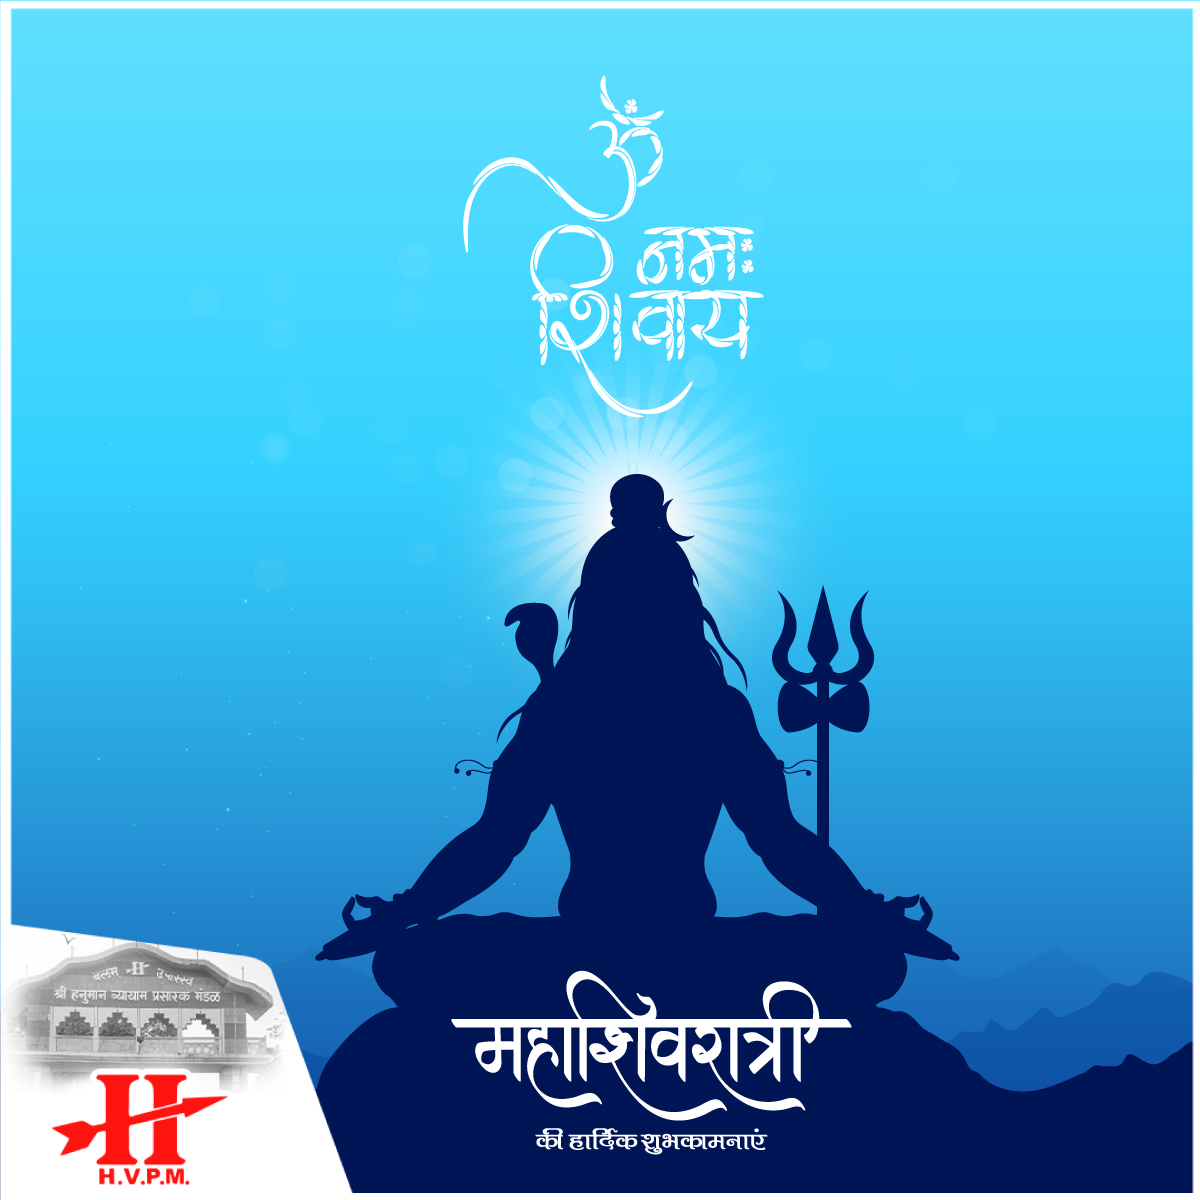 A night to revere Lord Shiva's role in the cycle of creation, preservation, and destruction, reminding us of the virtues of self-reflection, devotion, and the overcoming of darkness with light. #shivratri #mahadev #shiva #mahashivratri #bholenath #HVPM #hvpm #Amaravati